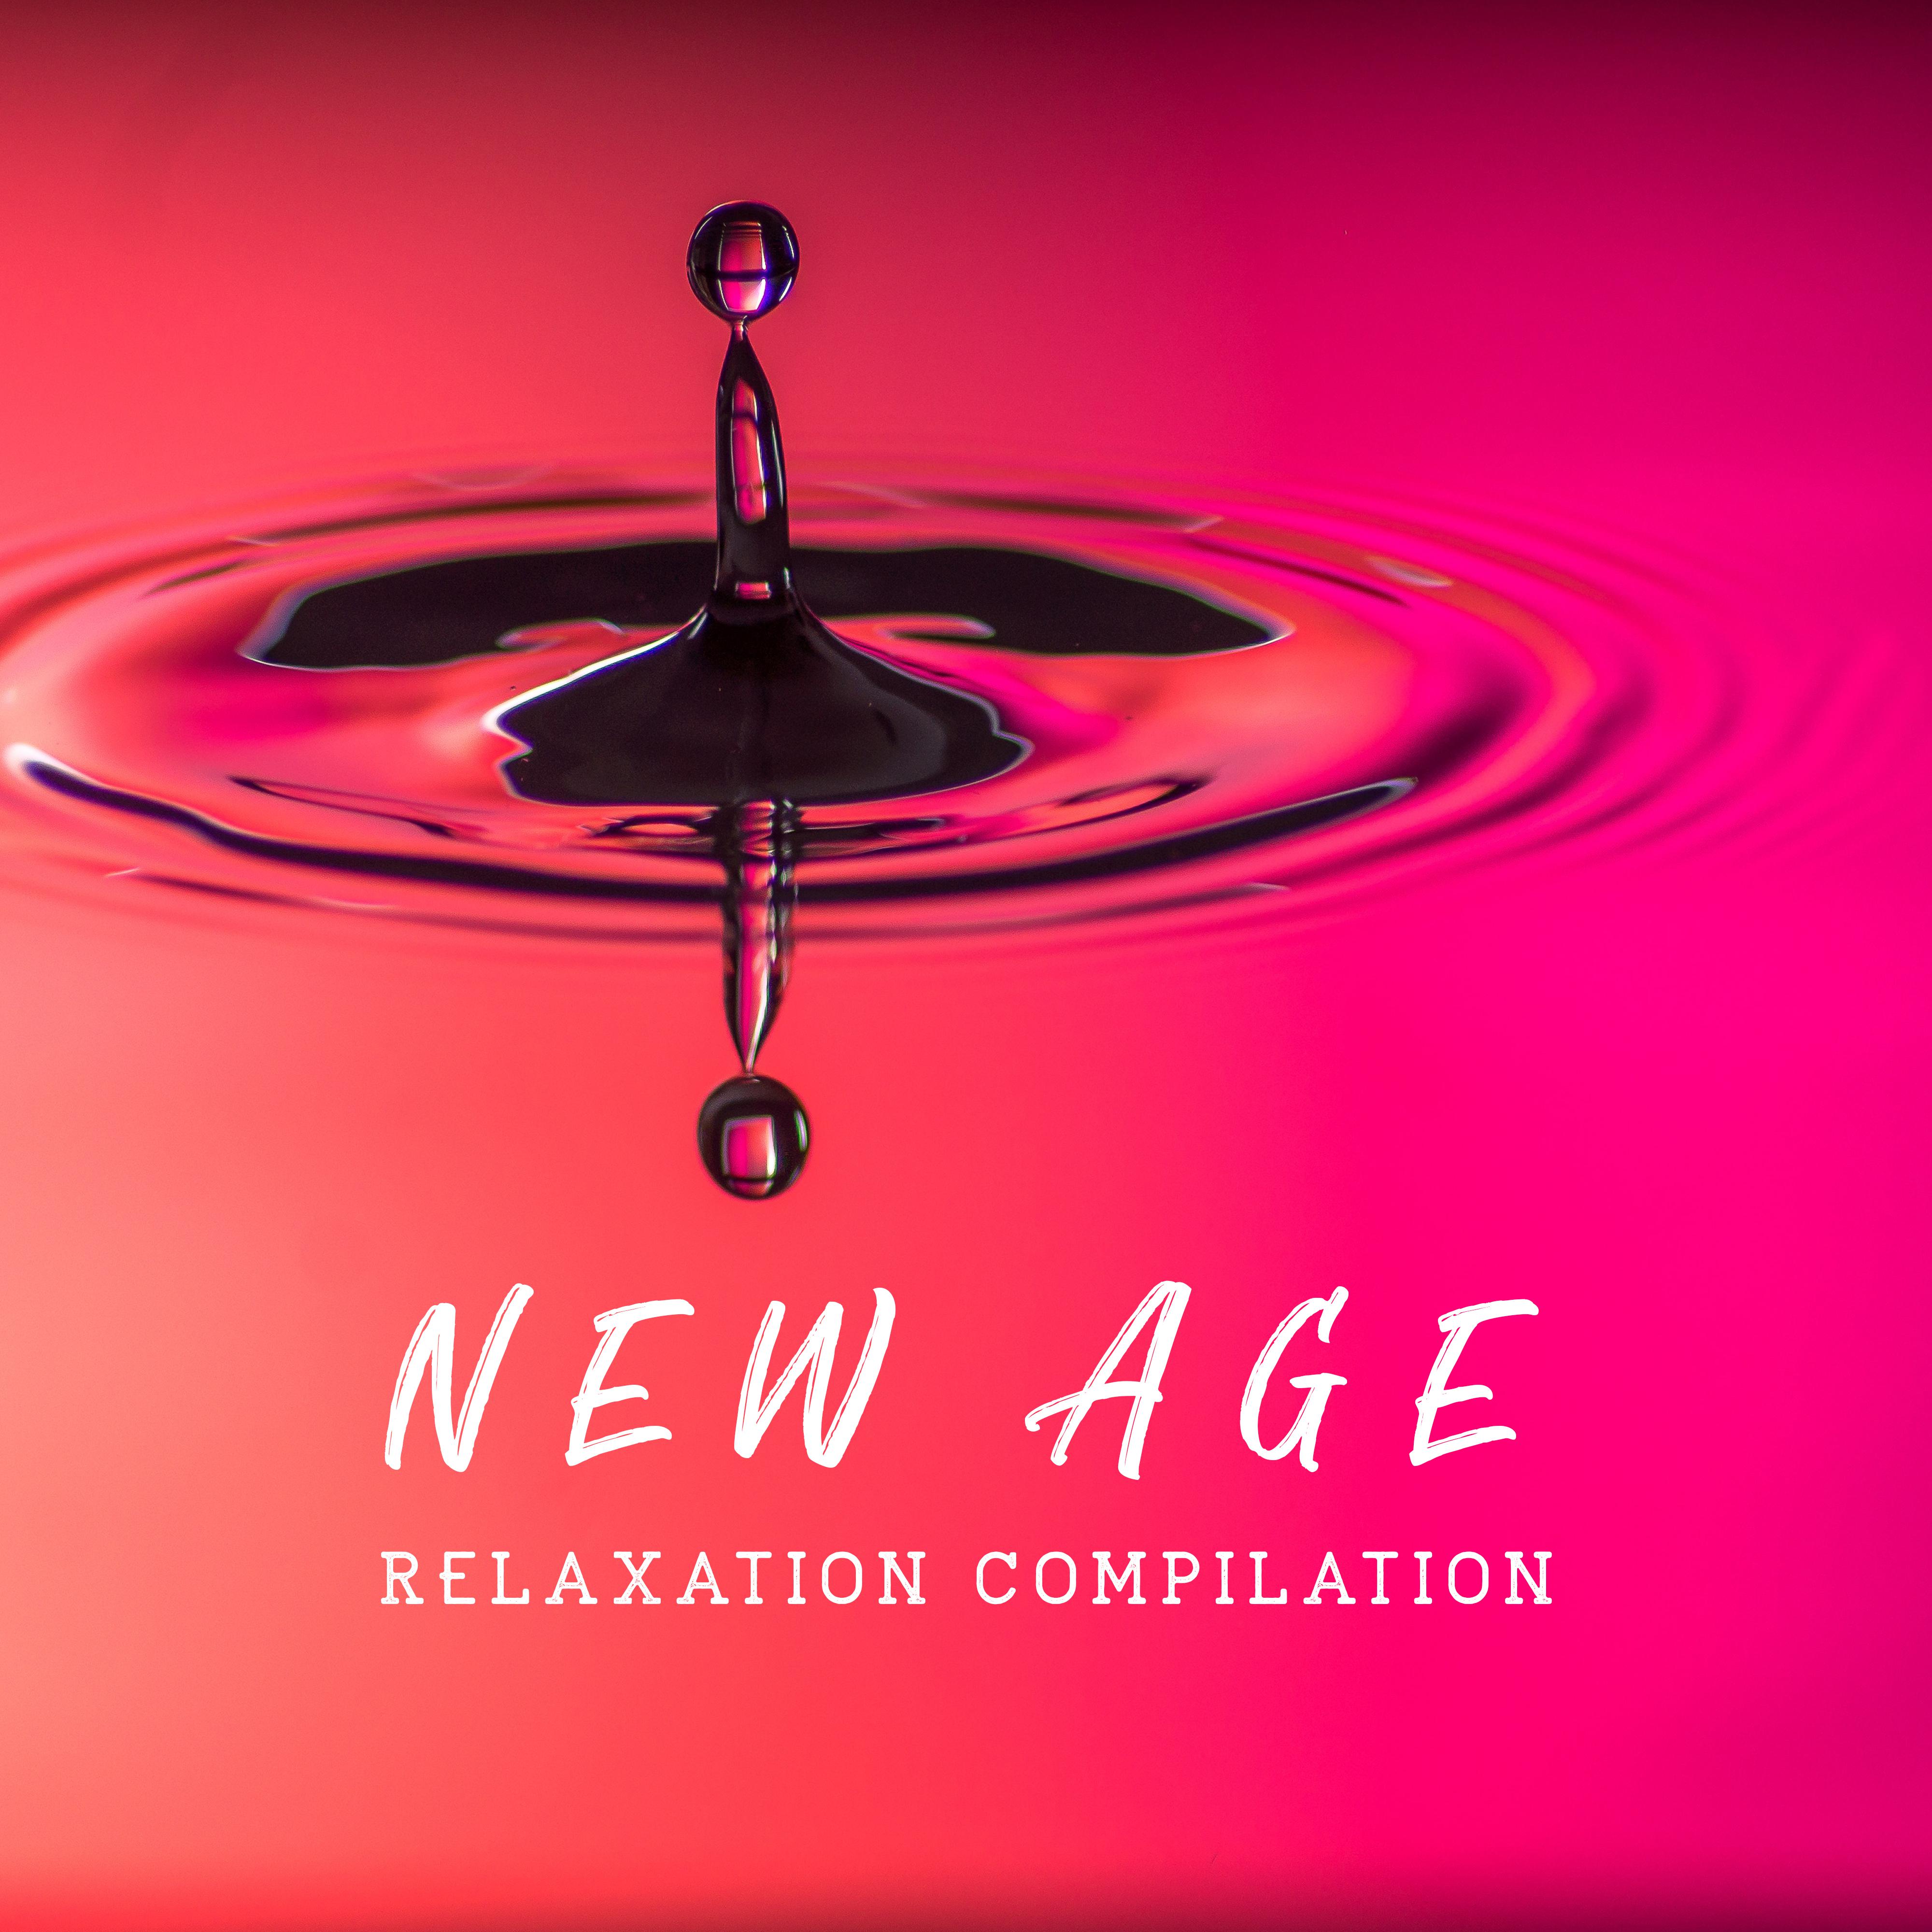 New Age Relaxation Compilation: 2019 Soft Melodies for Total Relax, Calming Down & Reduce Stress